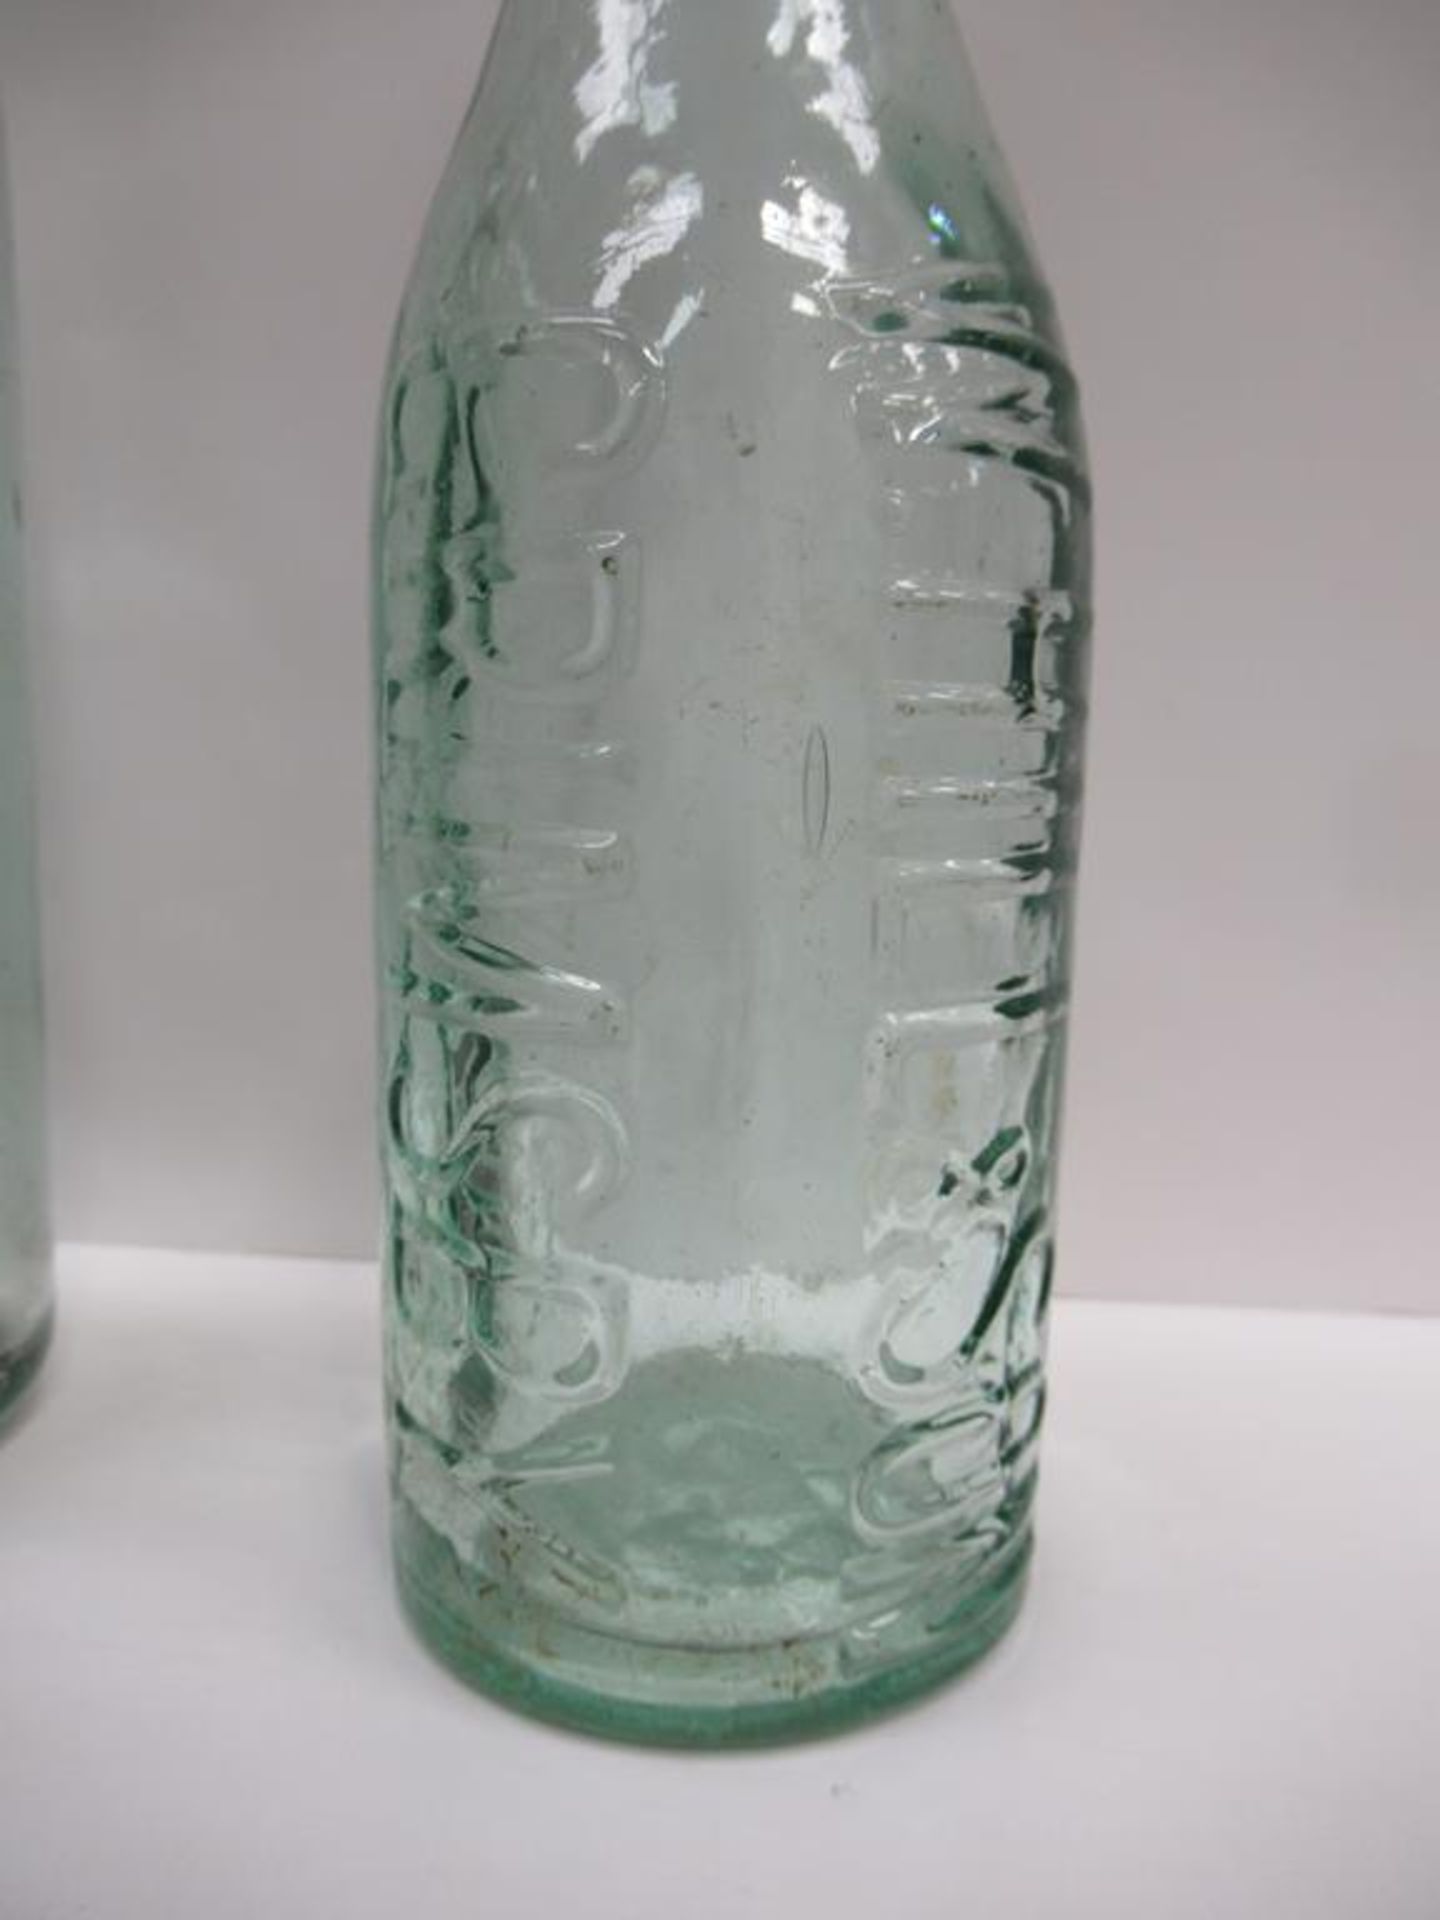 6x Grimsby (3x New Clee) W. Hill & Son (2) and W. Hill & Co (2) bottles - Image 6 of 25